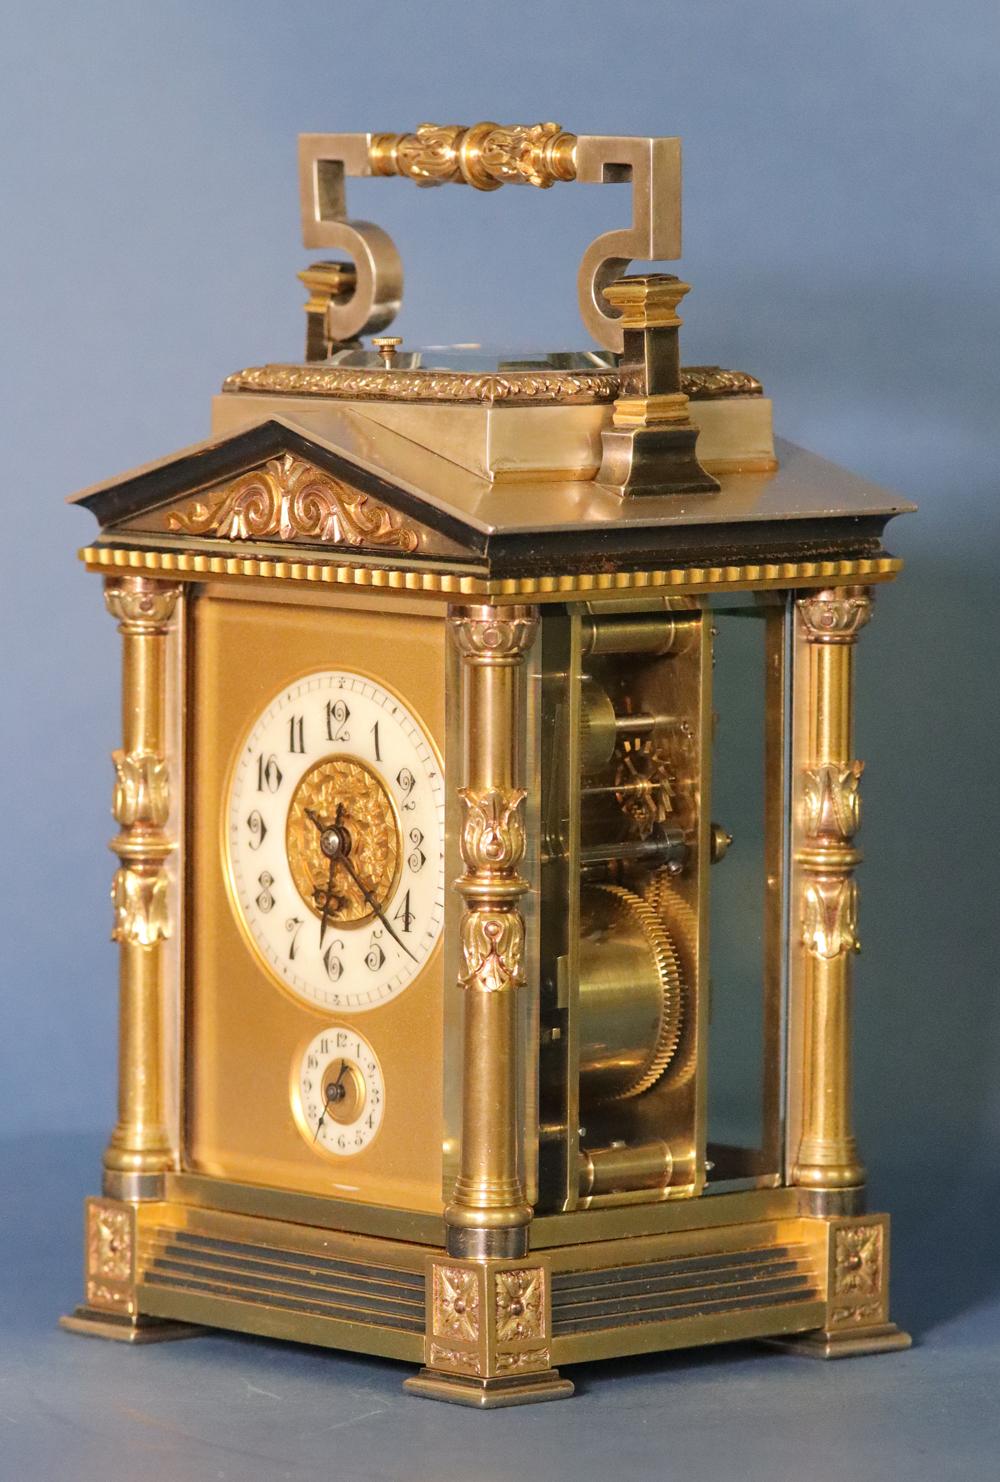 20th Century c.1900 French Multi-Finish Architectural Carriage Clock